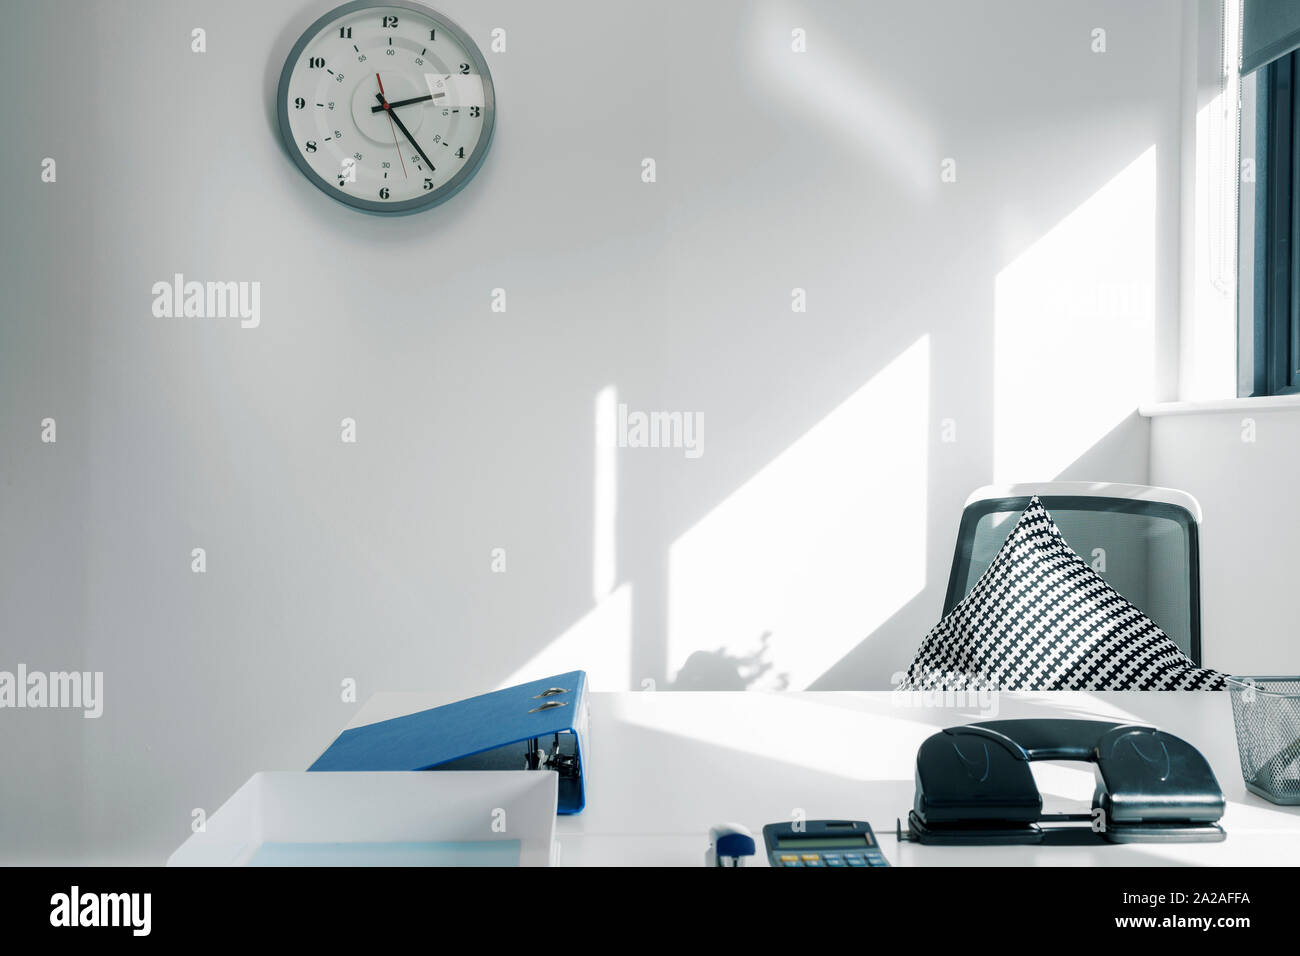 Empty office desk and chair with a clock above emphasising lateness Stock Photo